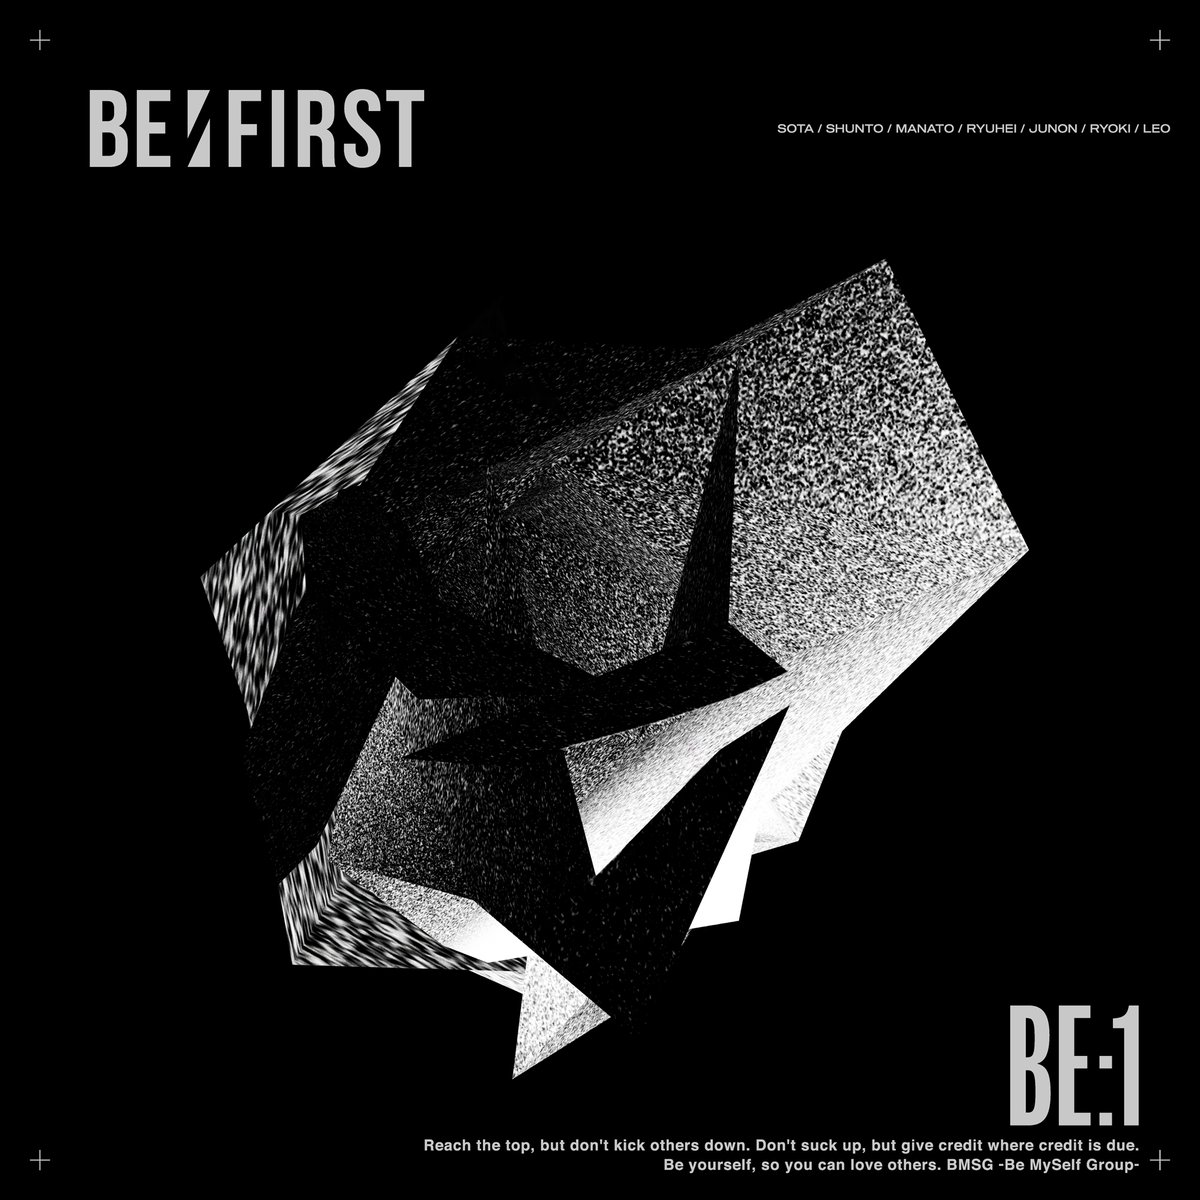 BE:FIRST / Move OnSpotify(@SpotifyJP)のプレイリストに選曲🎧New Music Wednesday 🎧Teen Culture🎧Dance Pop: Japan🎧Boys Group Japan#BEFIRST#MoveOn #BE_1#Spotify_BEFIRST 